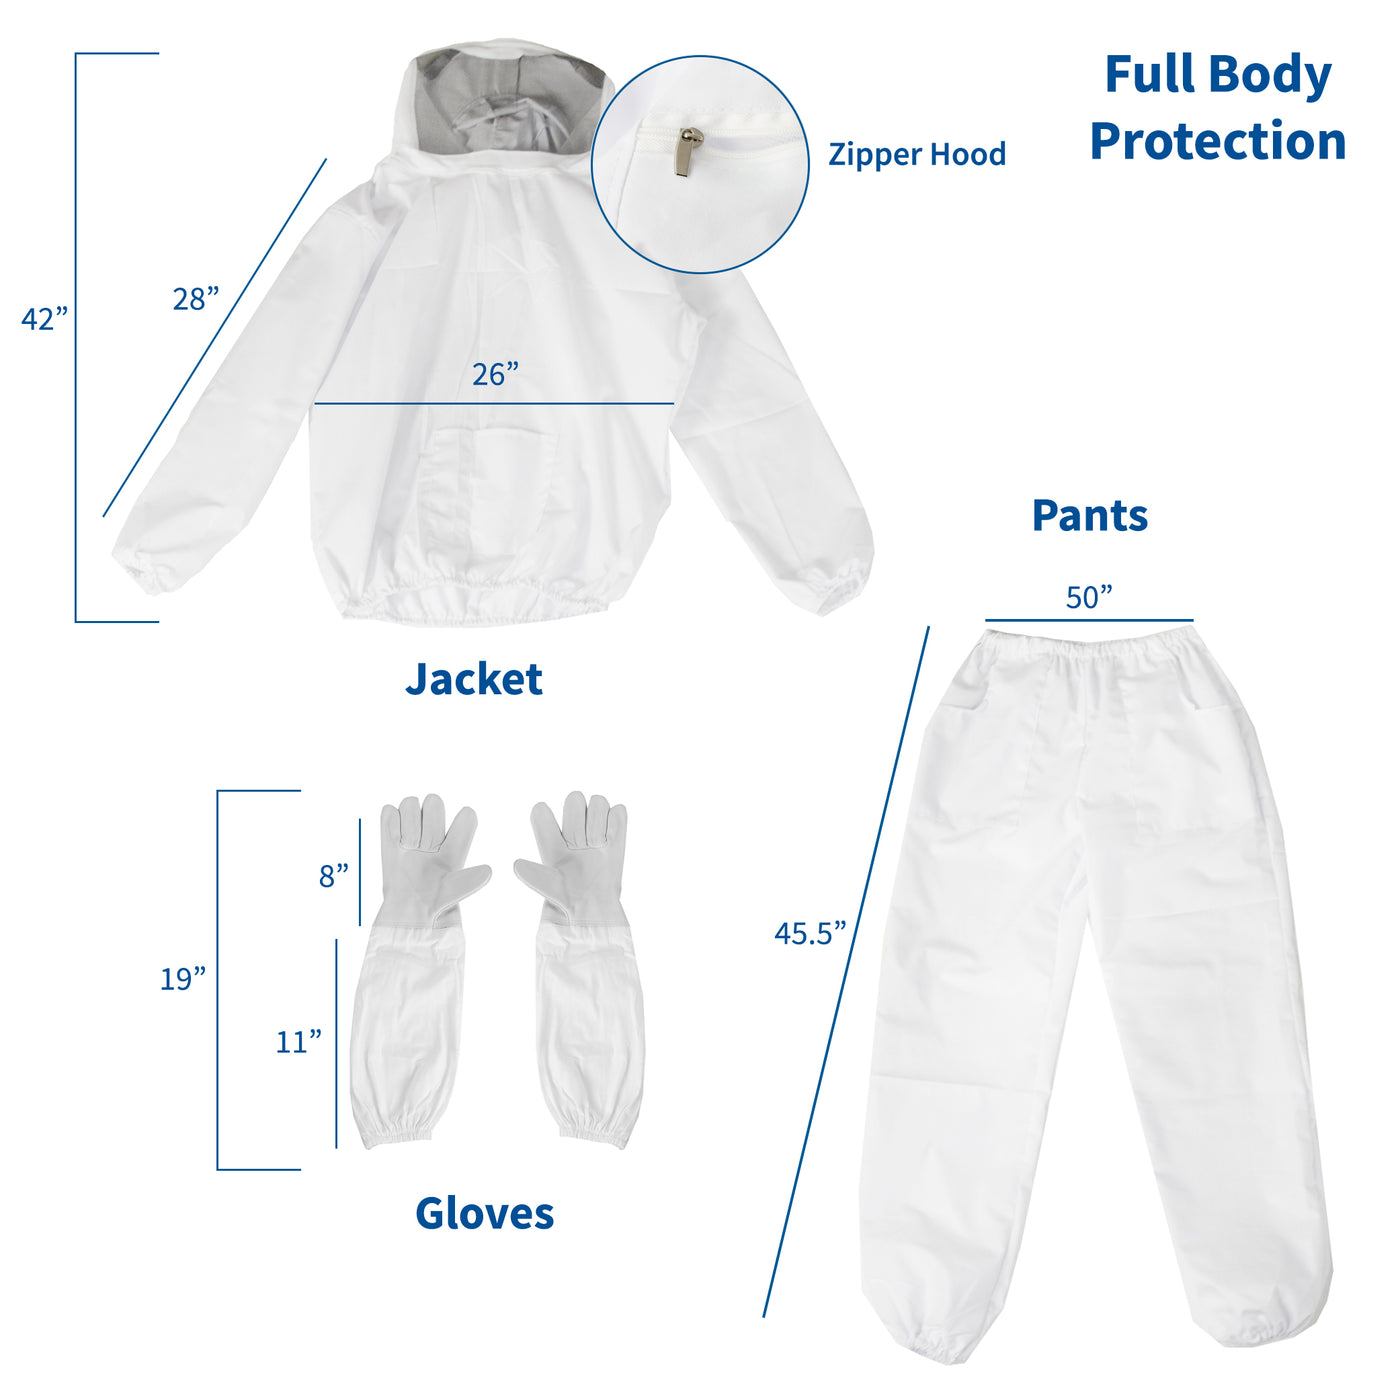 Large Bee Jacket, Pants, and Gloves Set 